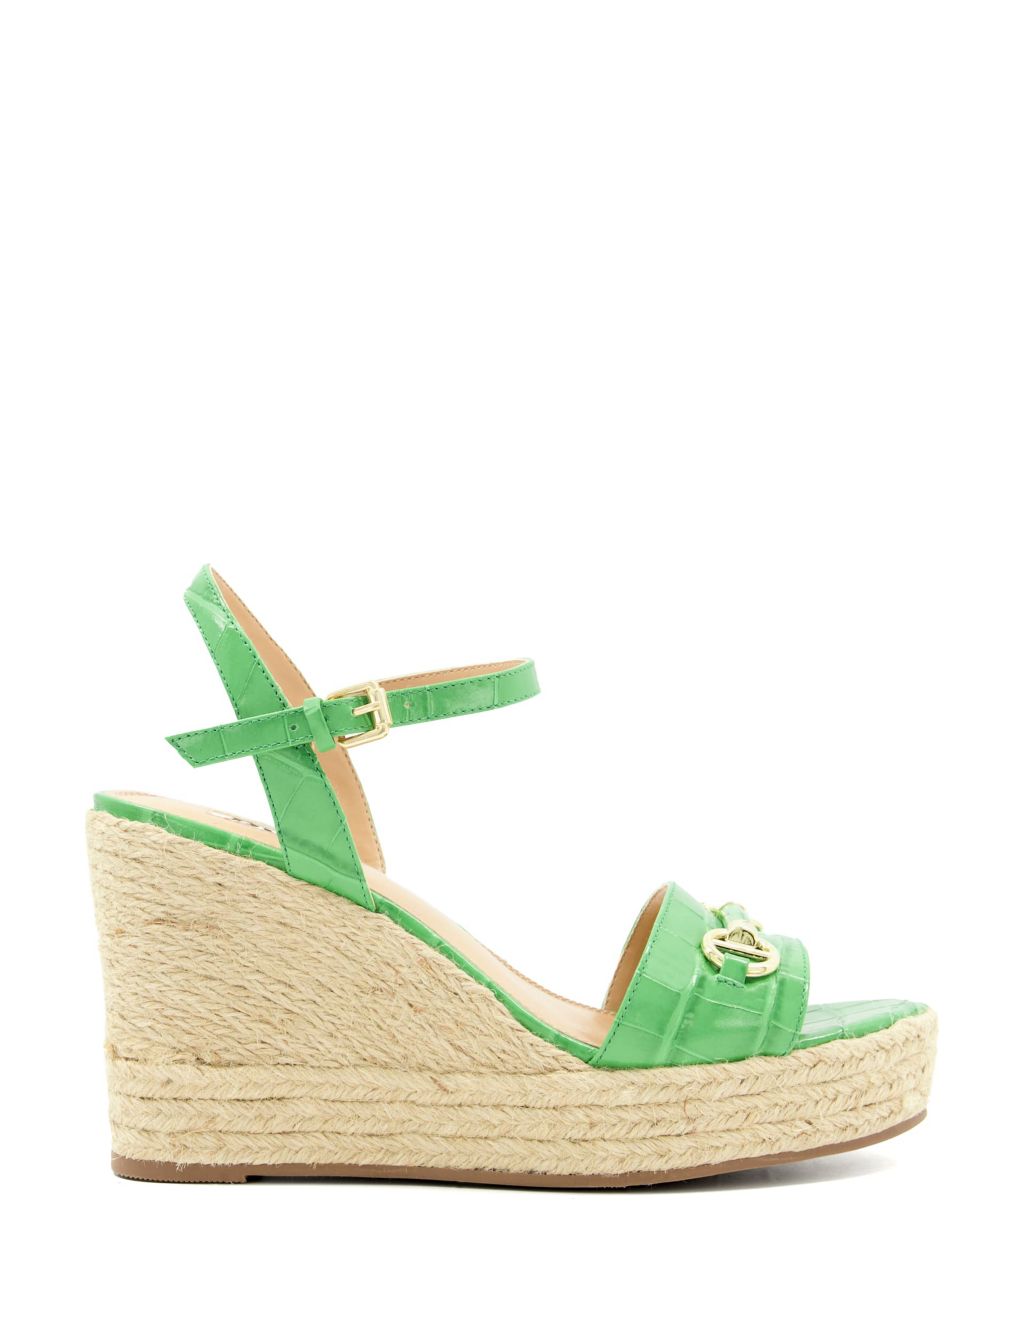 Leather Ankle Strap Wedge Sandals image 1